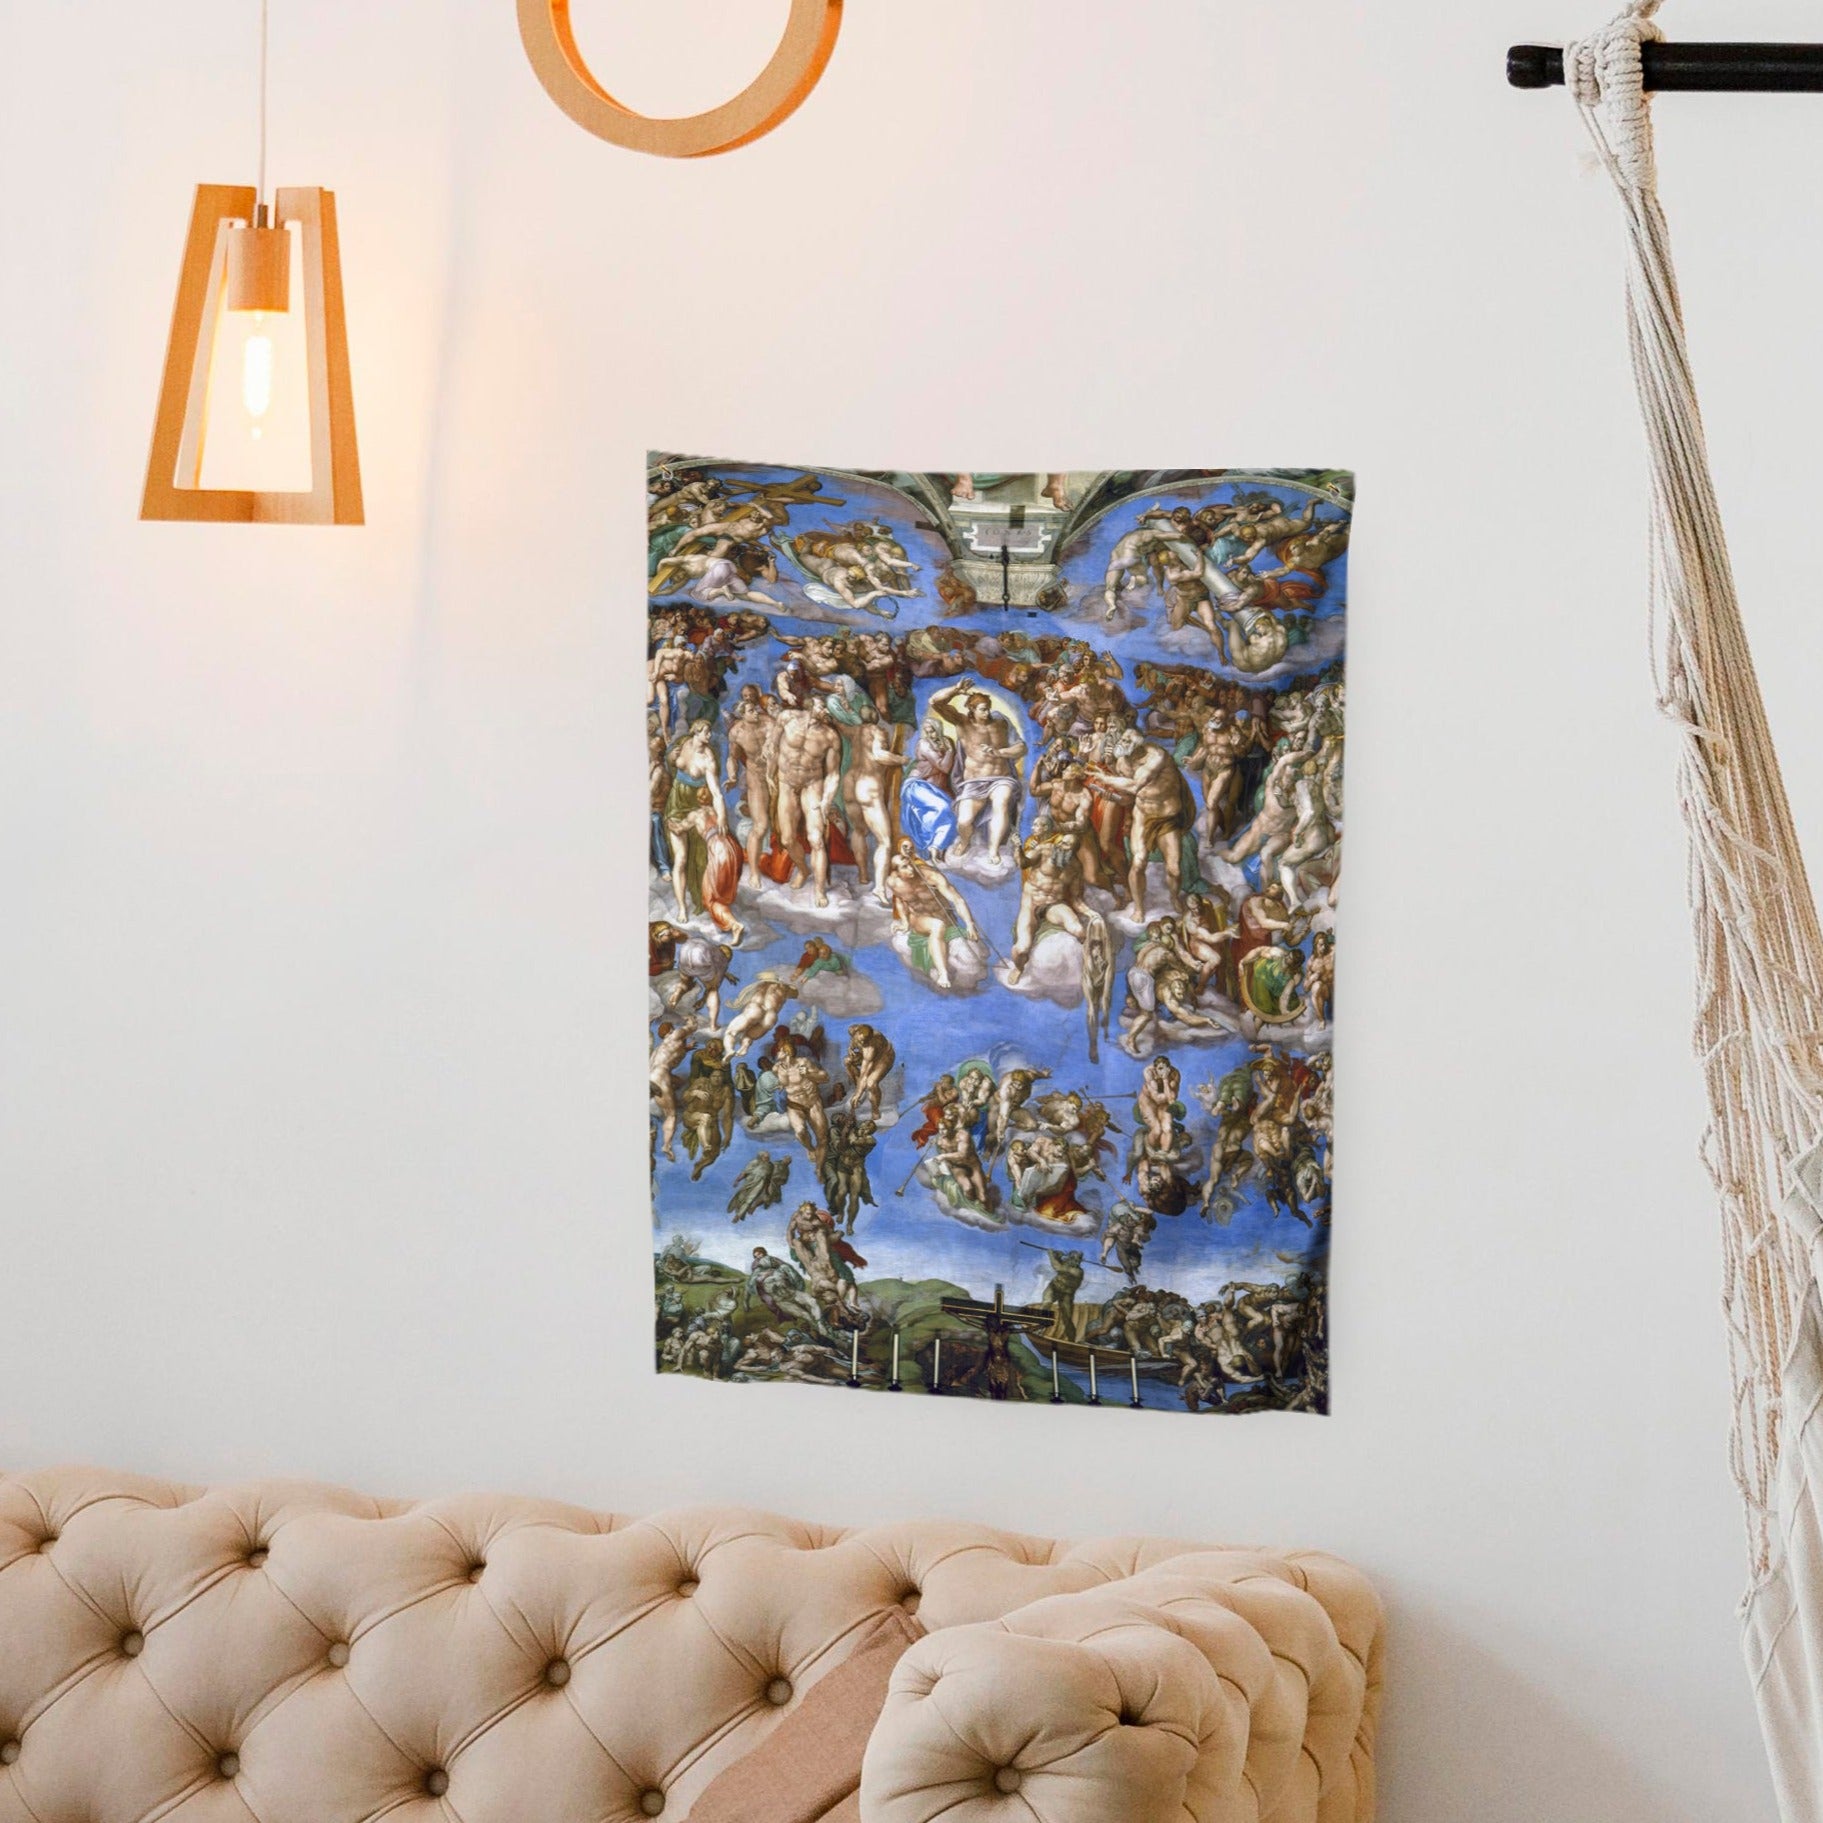 Wall decoration tapestry Michelangelo "The Last Judgment"